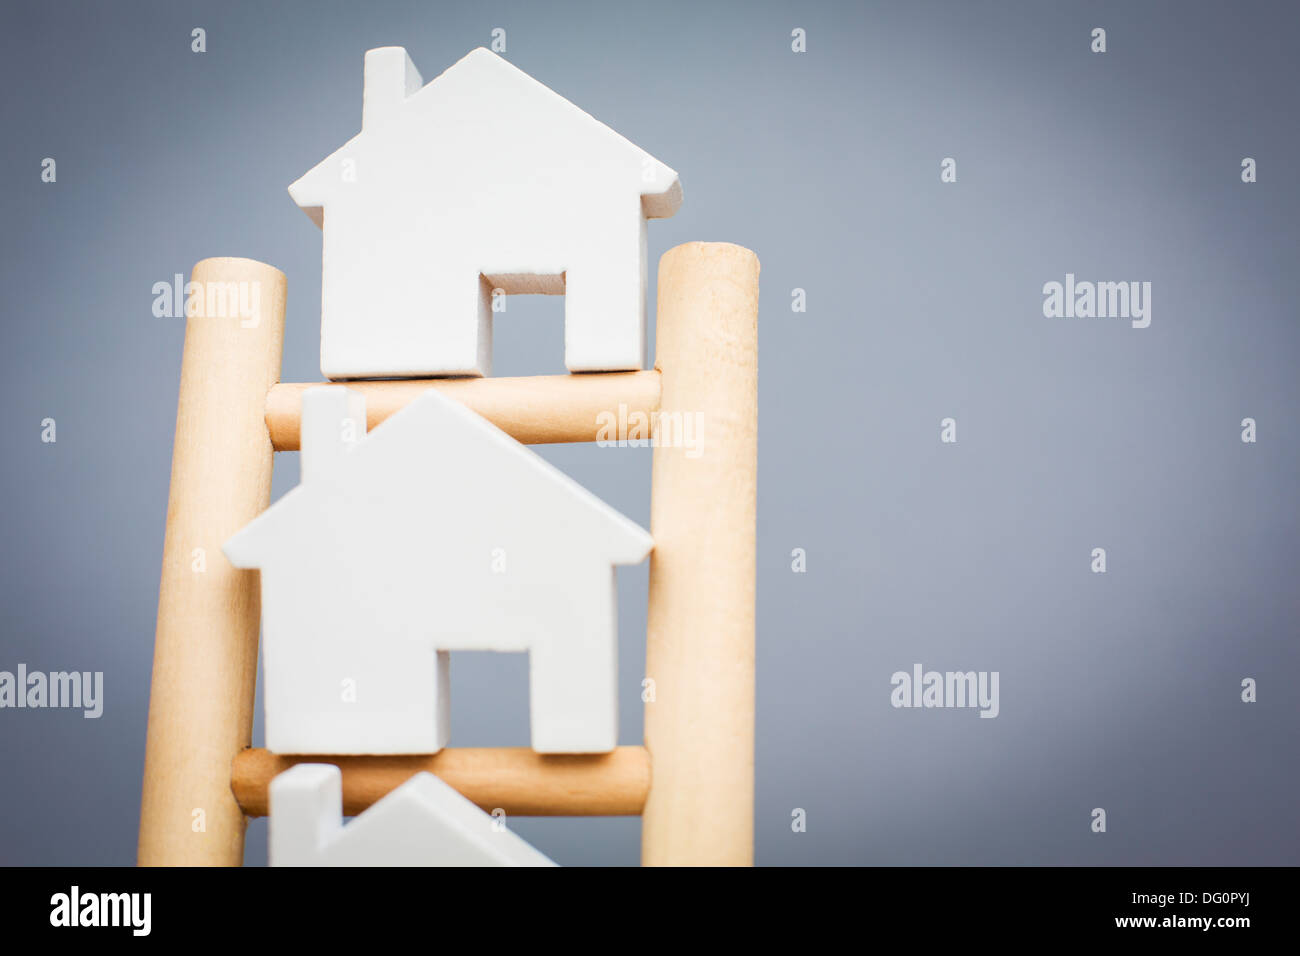 Concept Image To Illustrate Property Ladder Stock Photo